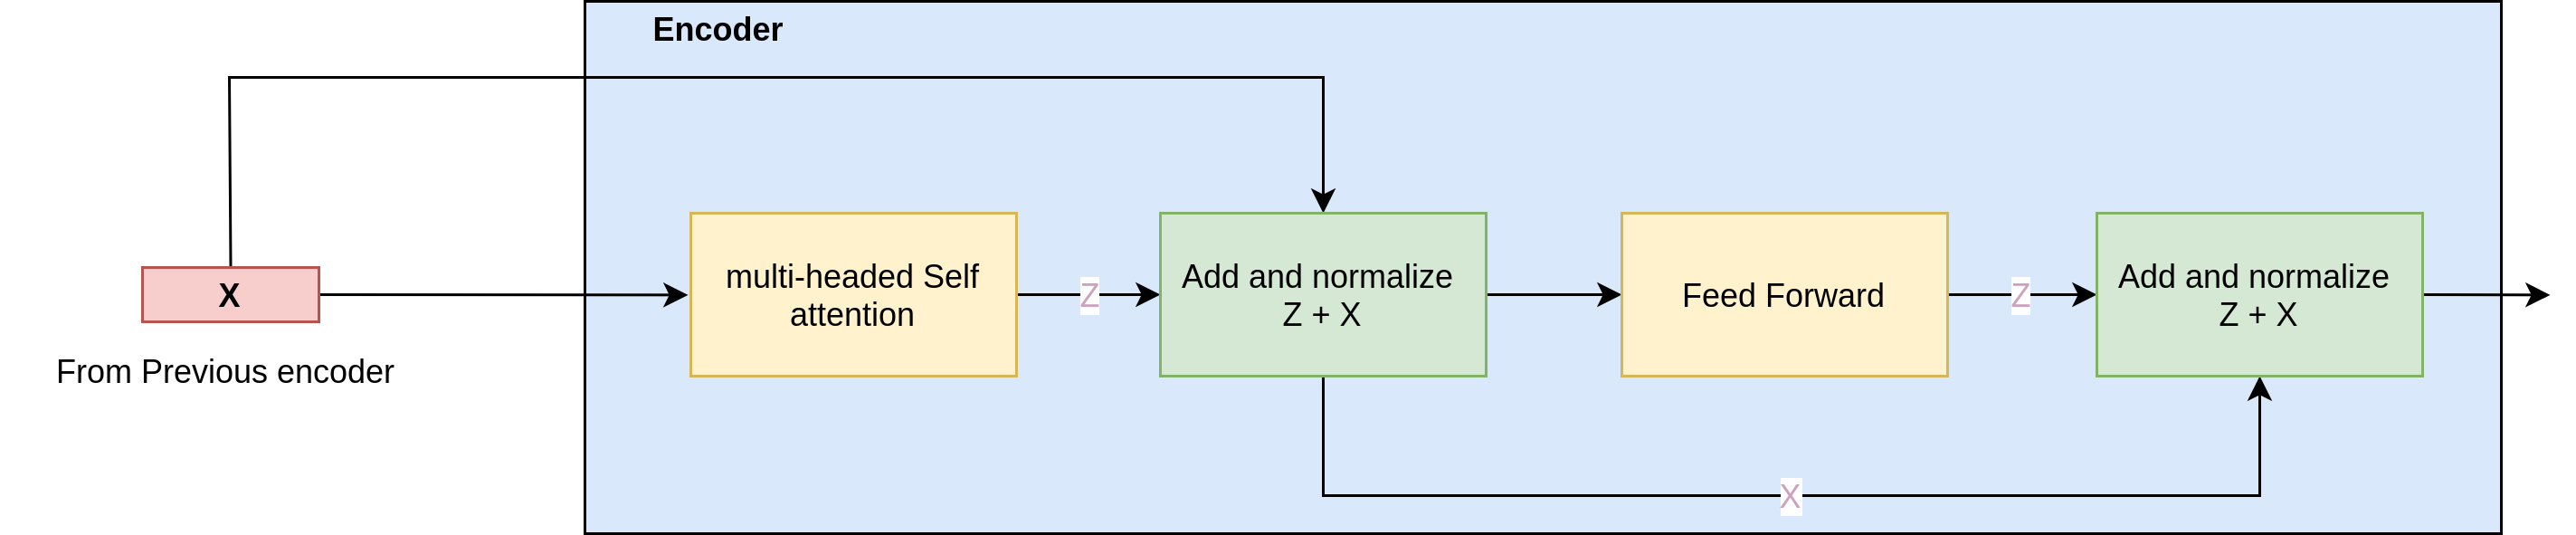 The Skip level connections help information flow in the network